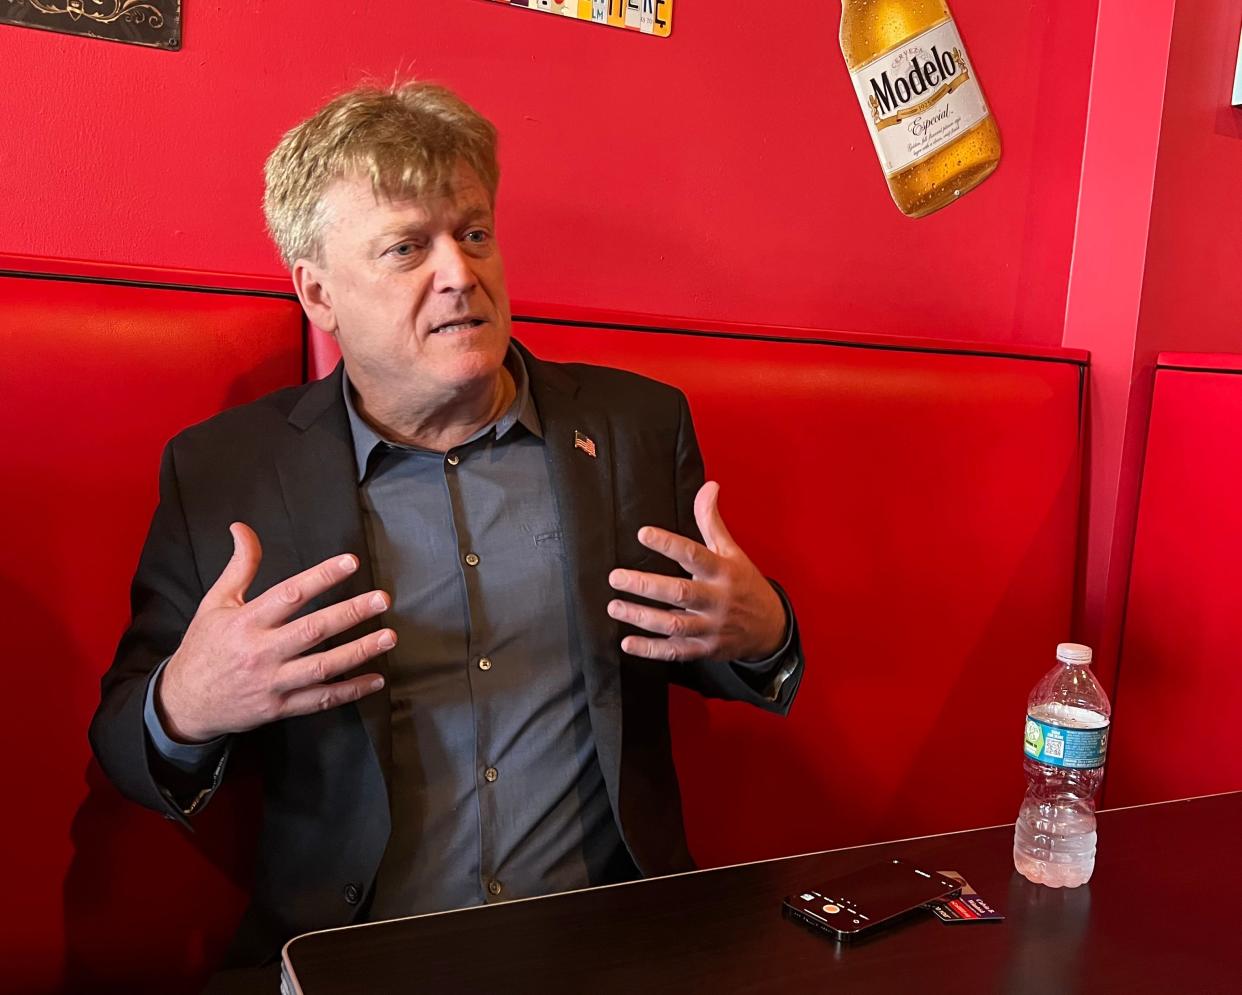 Former Overstock CEO Patrick Byrne speaks with a reporter after a press conference at a restaurant near the Conservative Political Action Conference. Byrne is one of the most prominent figures pushing unfounded claims about voting fraud in the 2020 election.